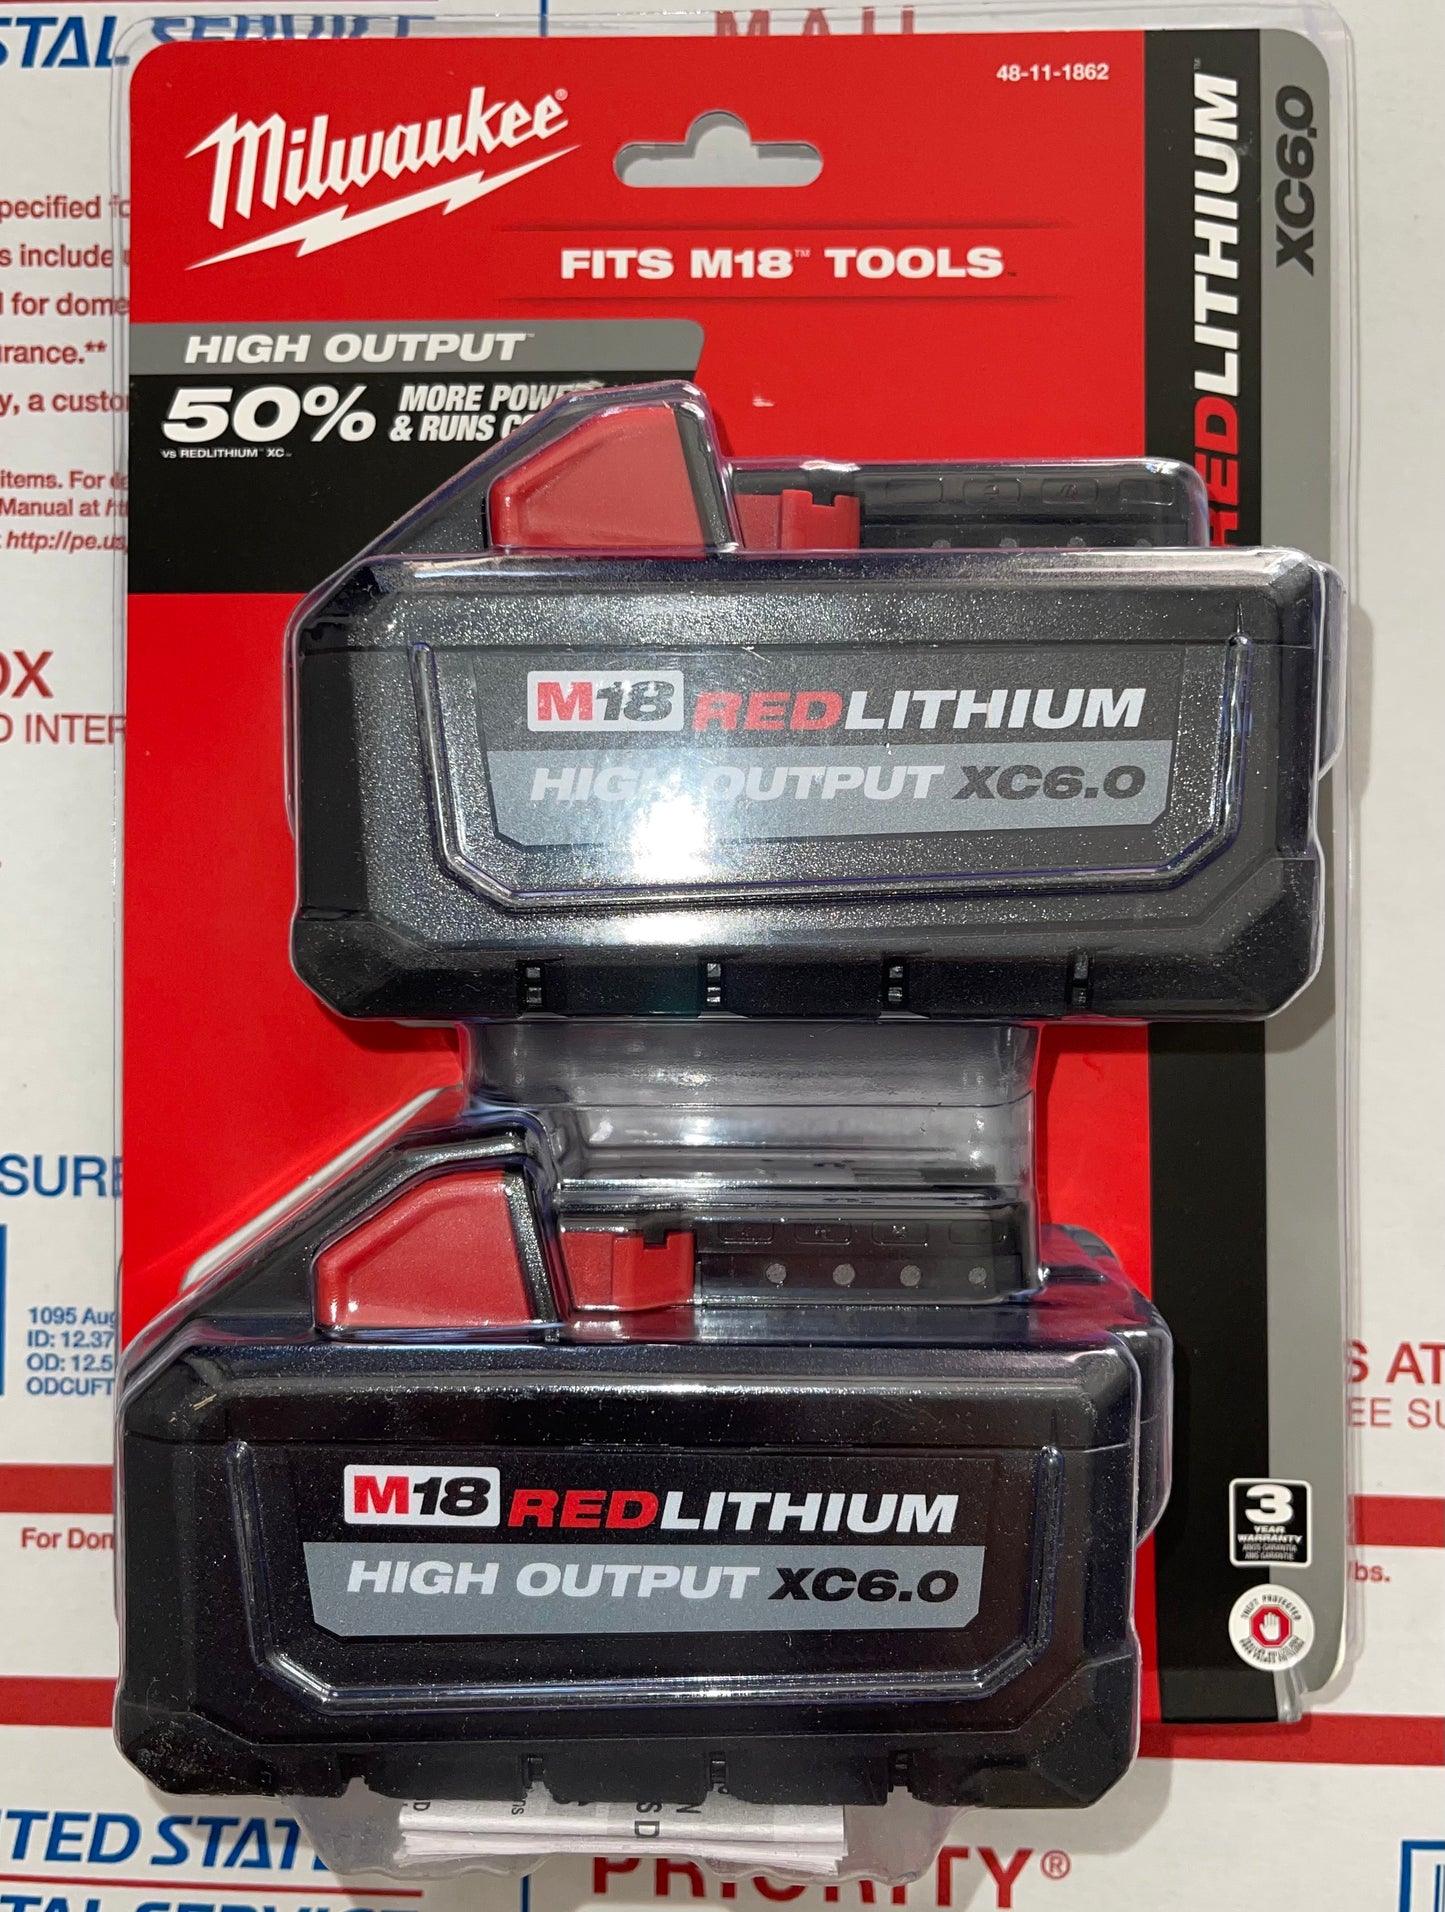 Milwaukee M18 REDLITHIUM XC6.0 High Output Battery Two Pack. Model #48-11-1862